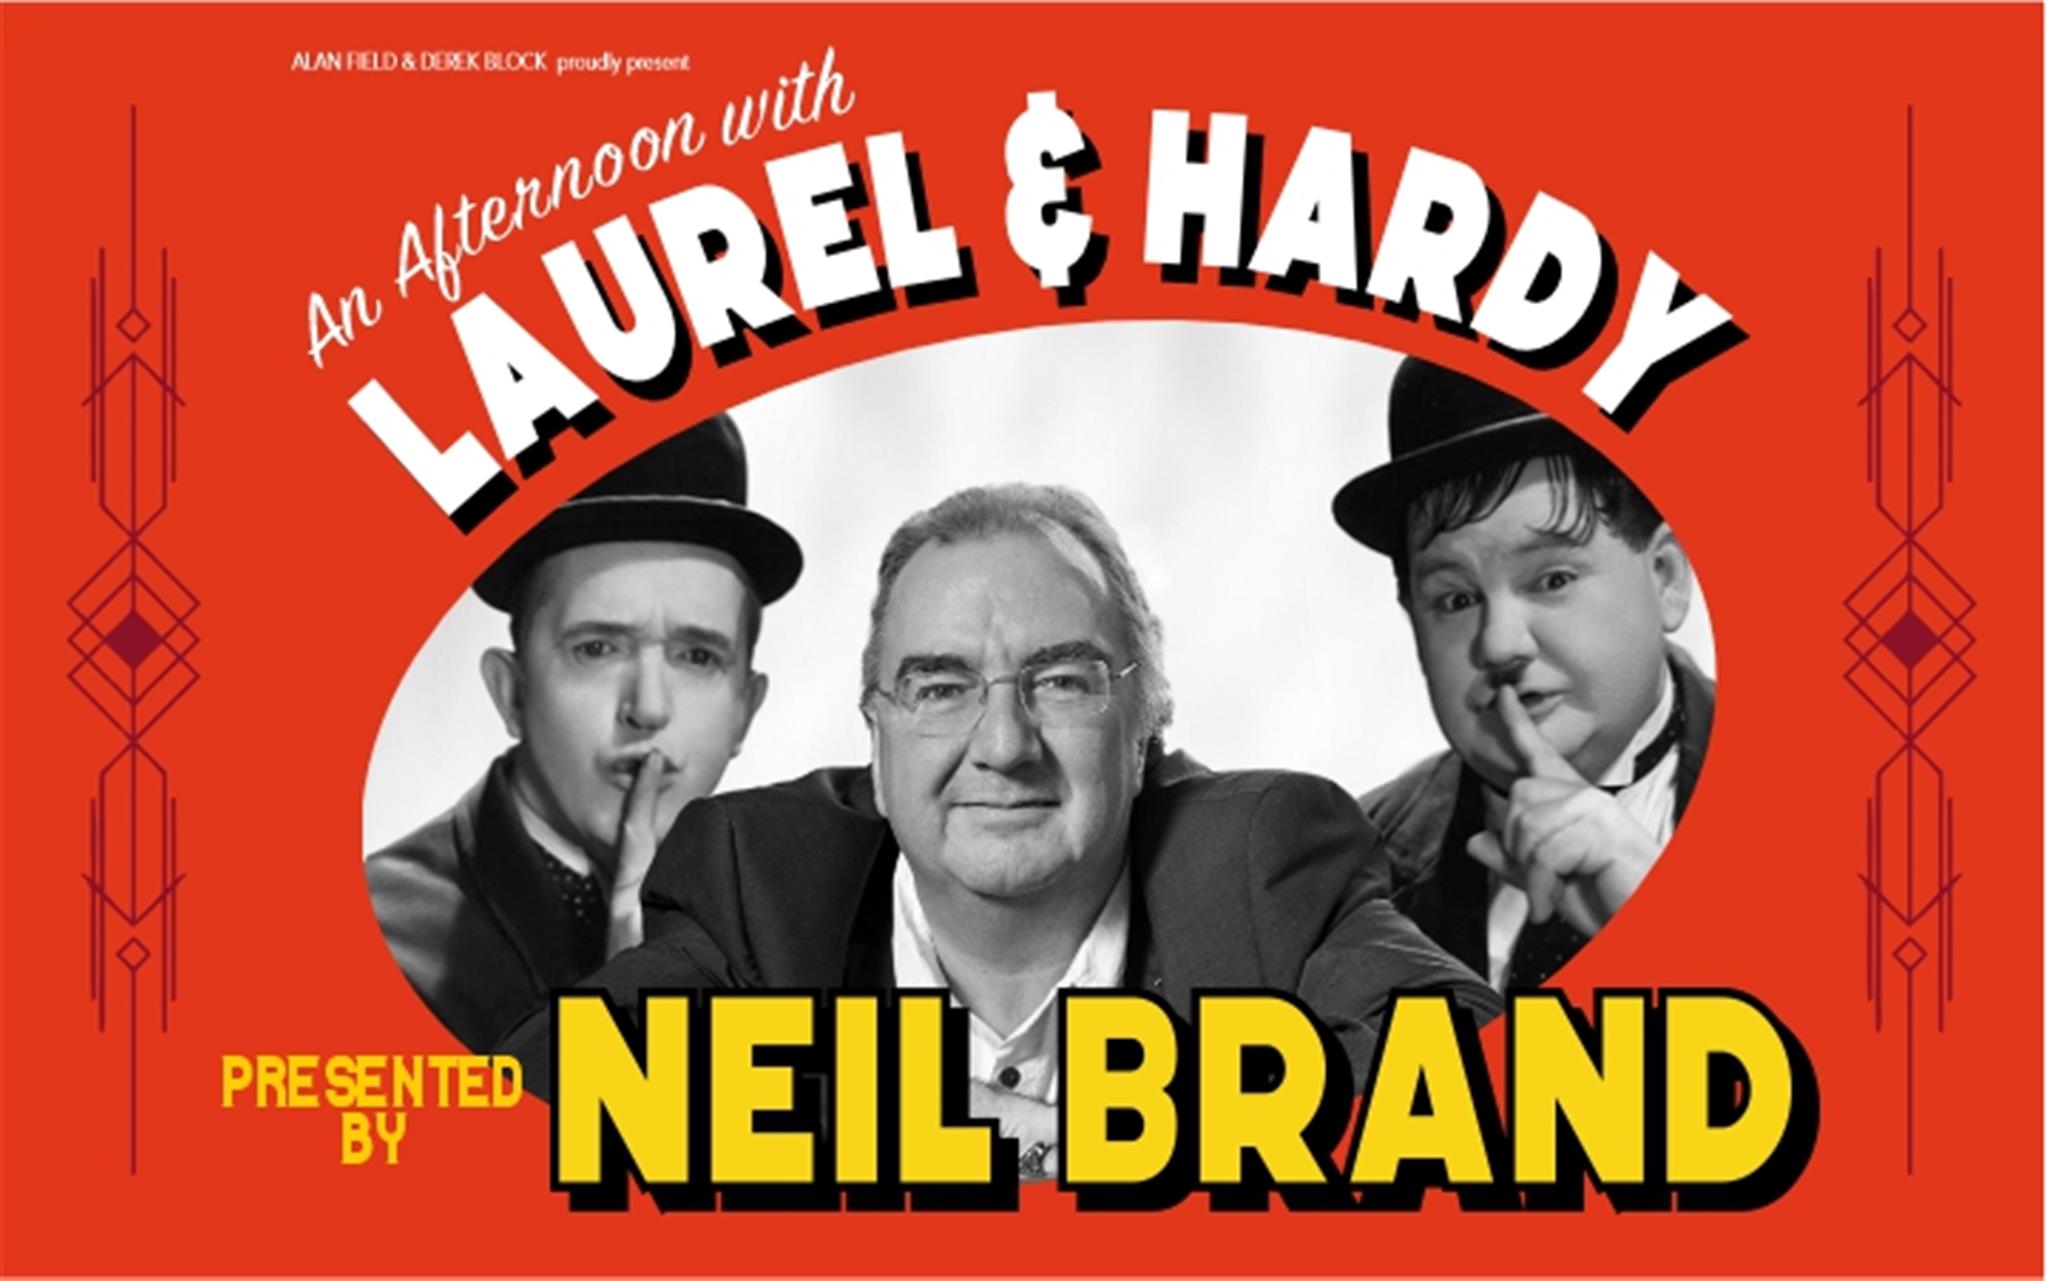 An Afternoon with Laurel & Hardy